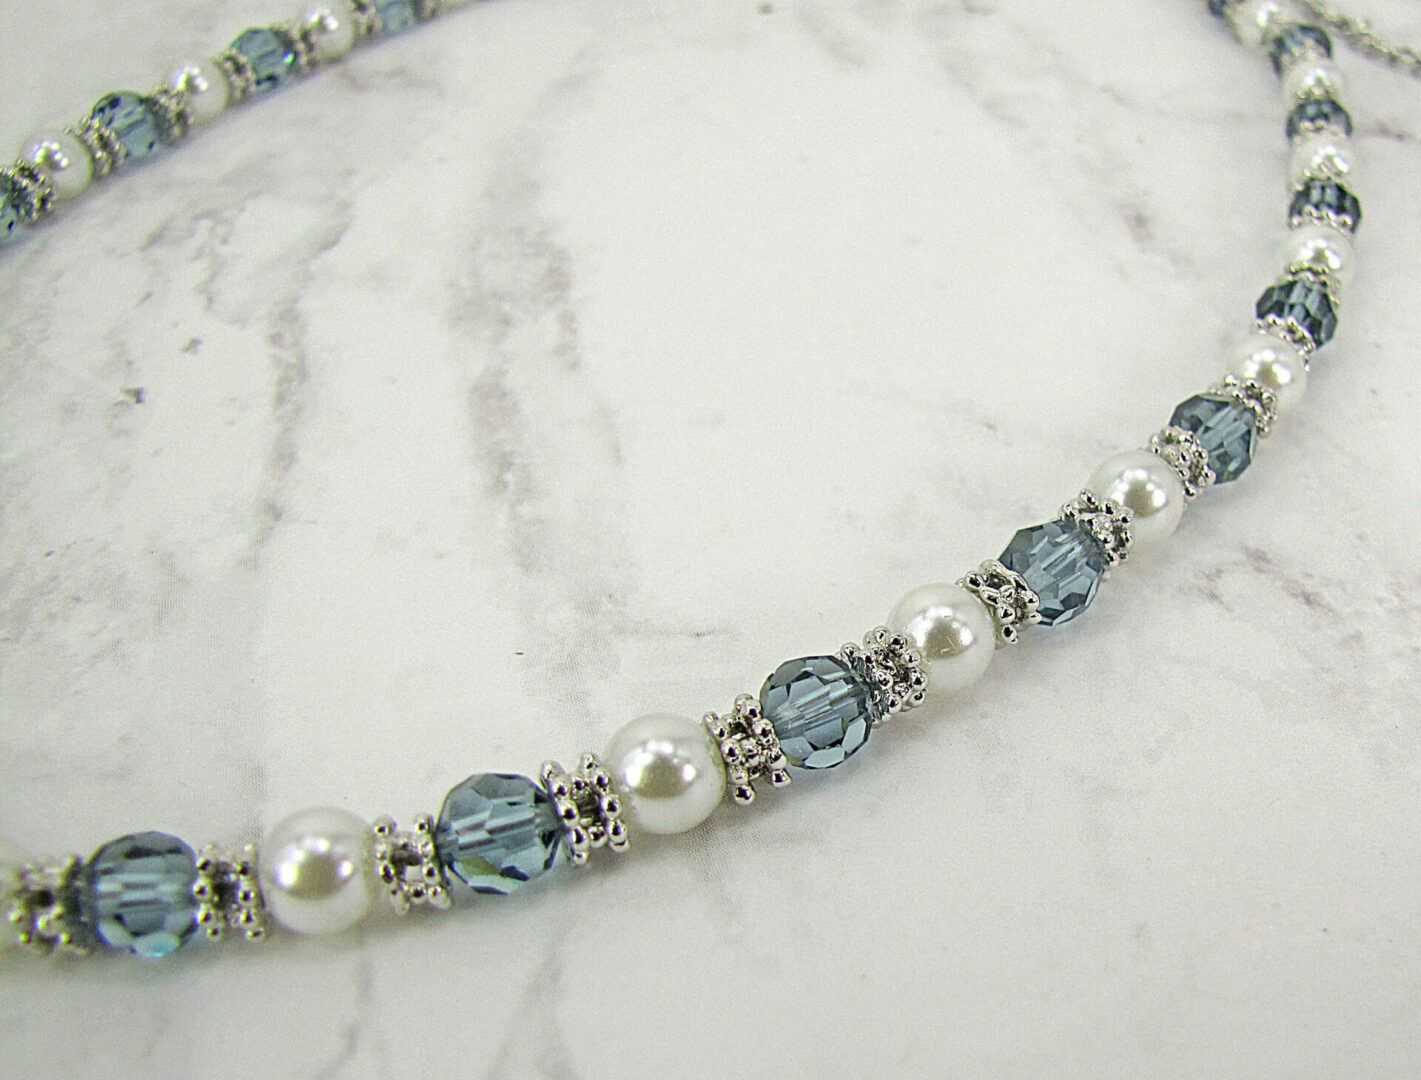 BLUE GLASS & PEARL NECKLACE - Calisa Designs